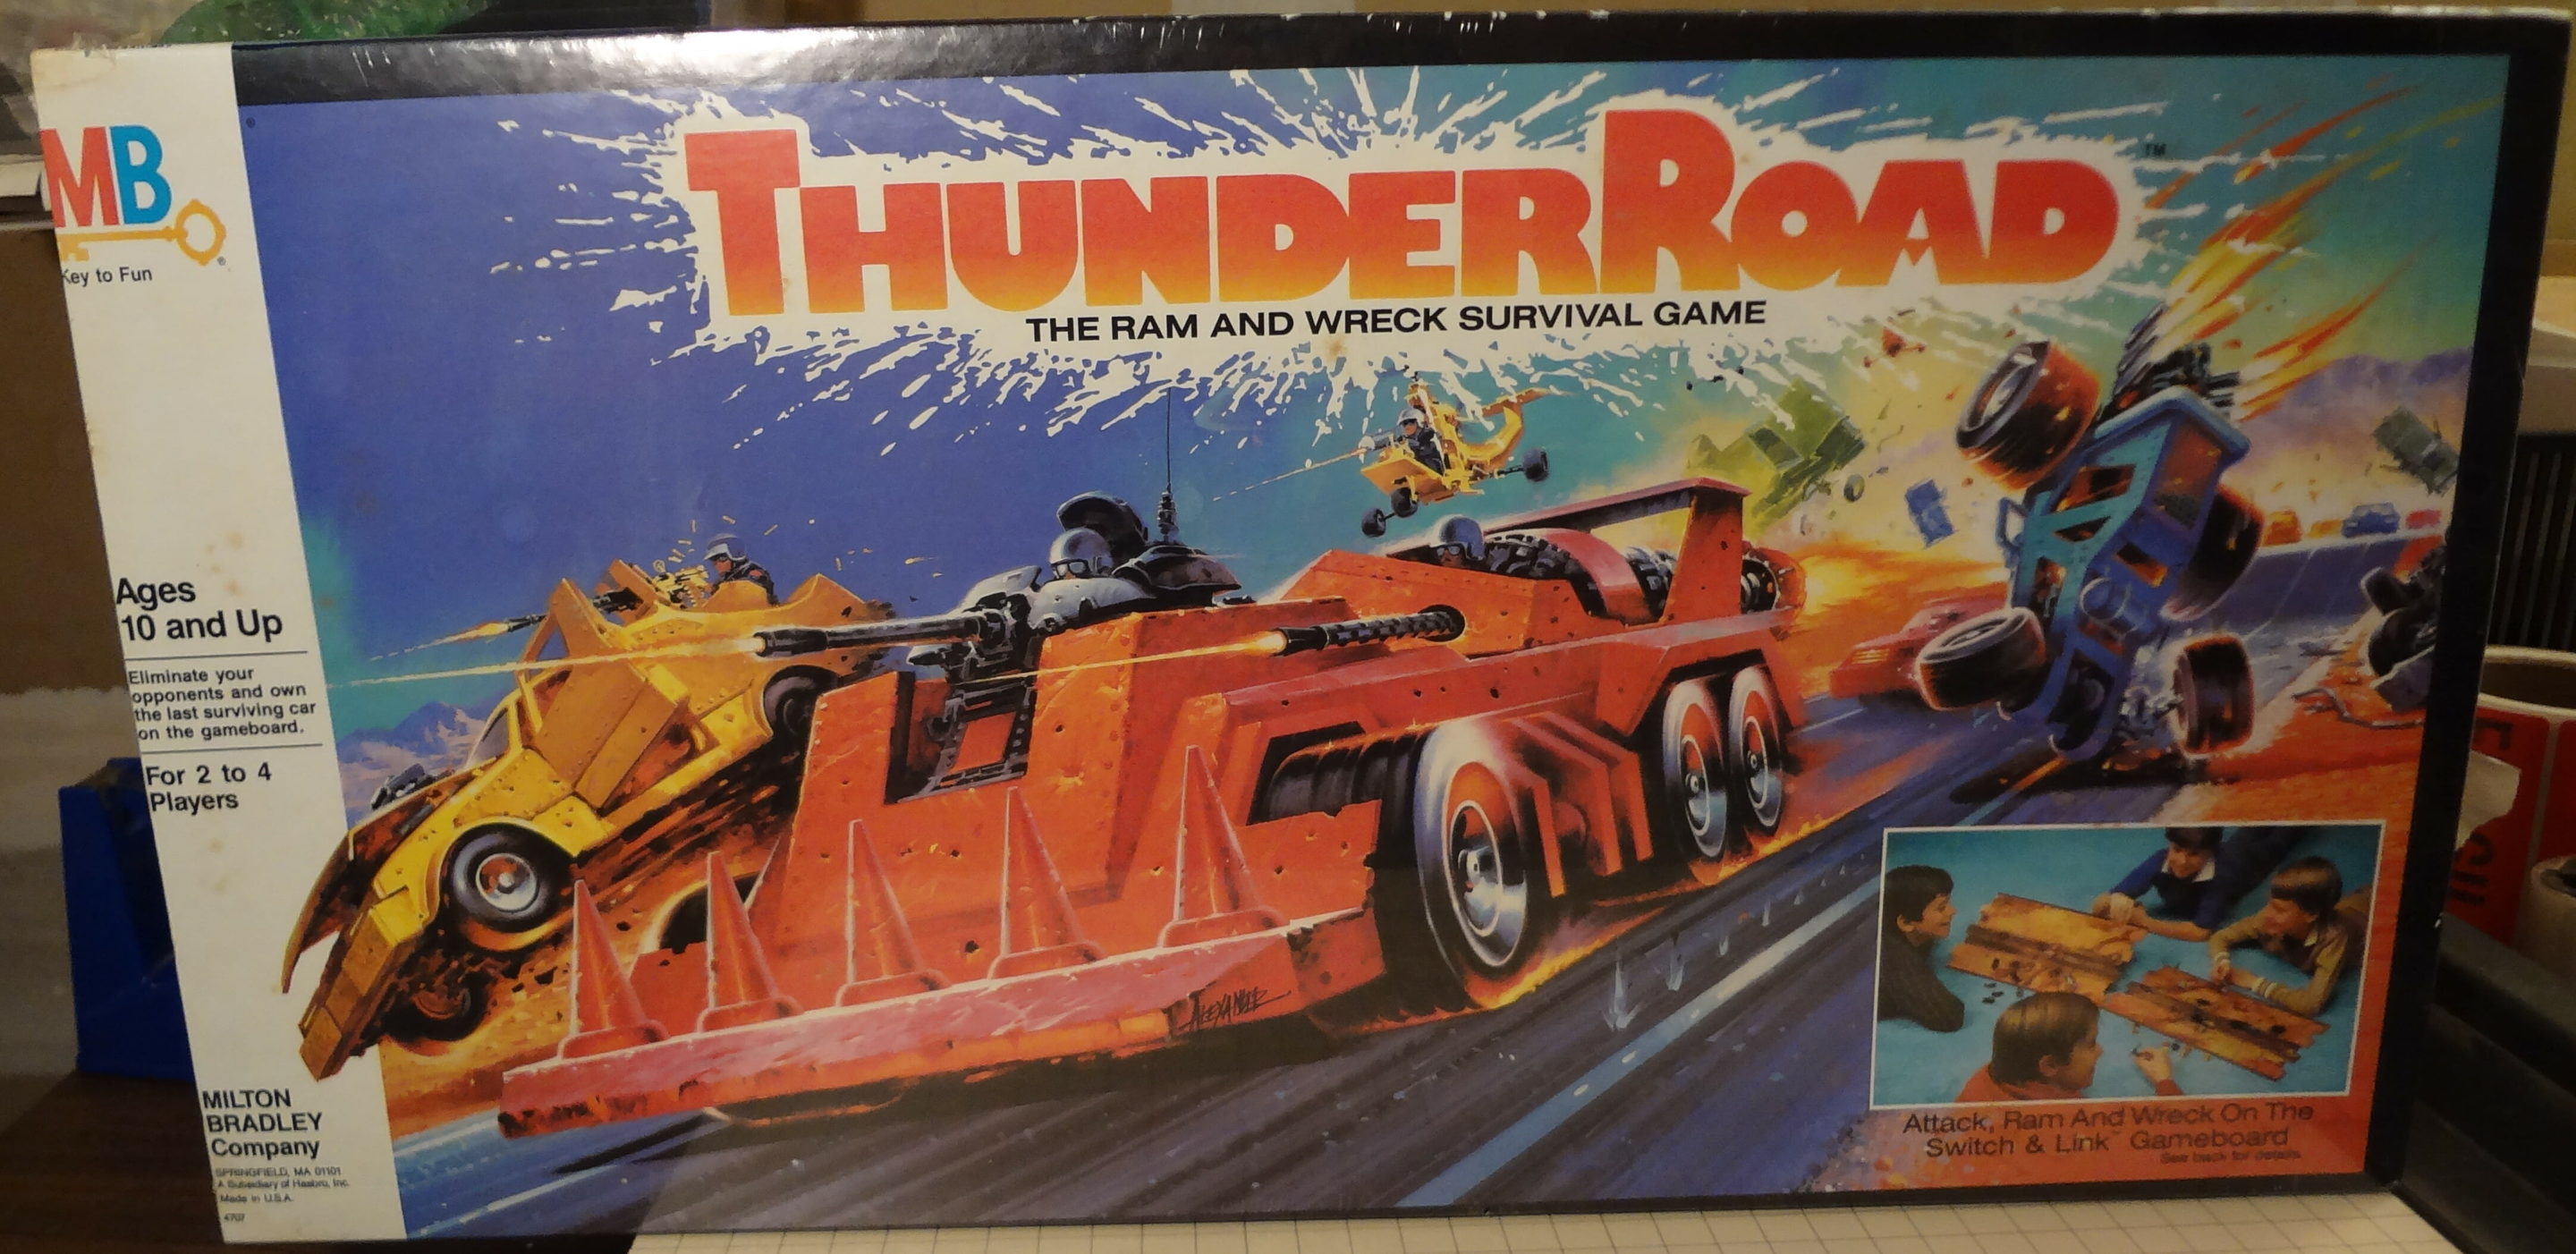 Cover of Thunder Road